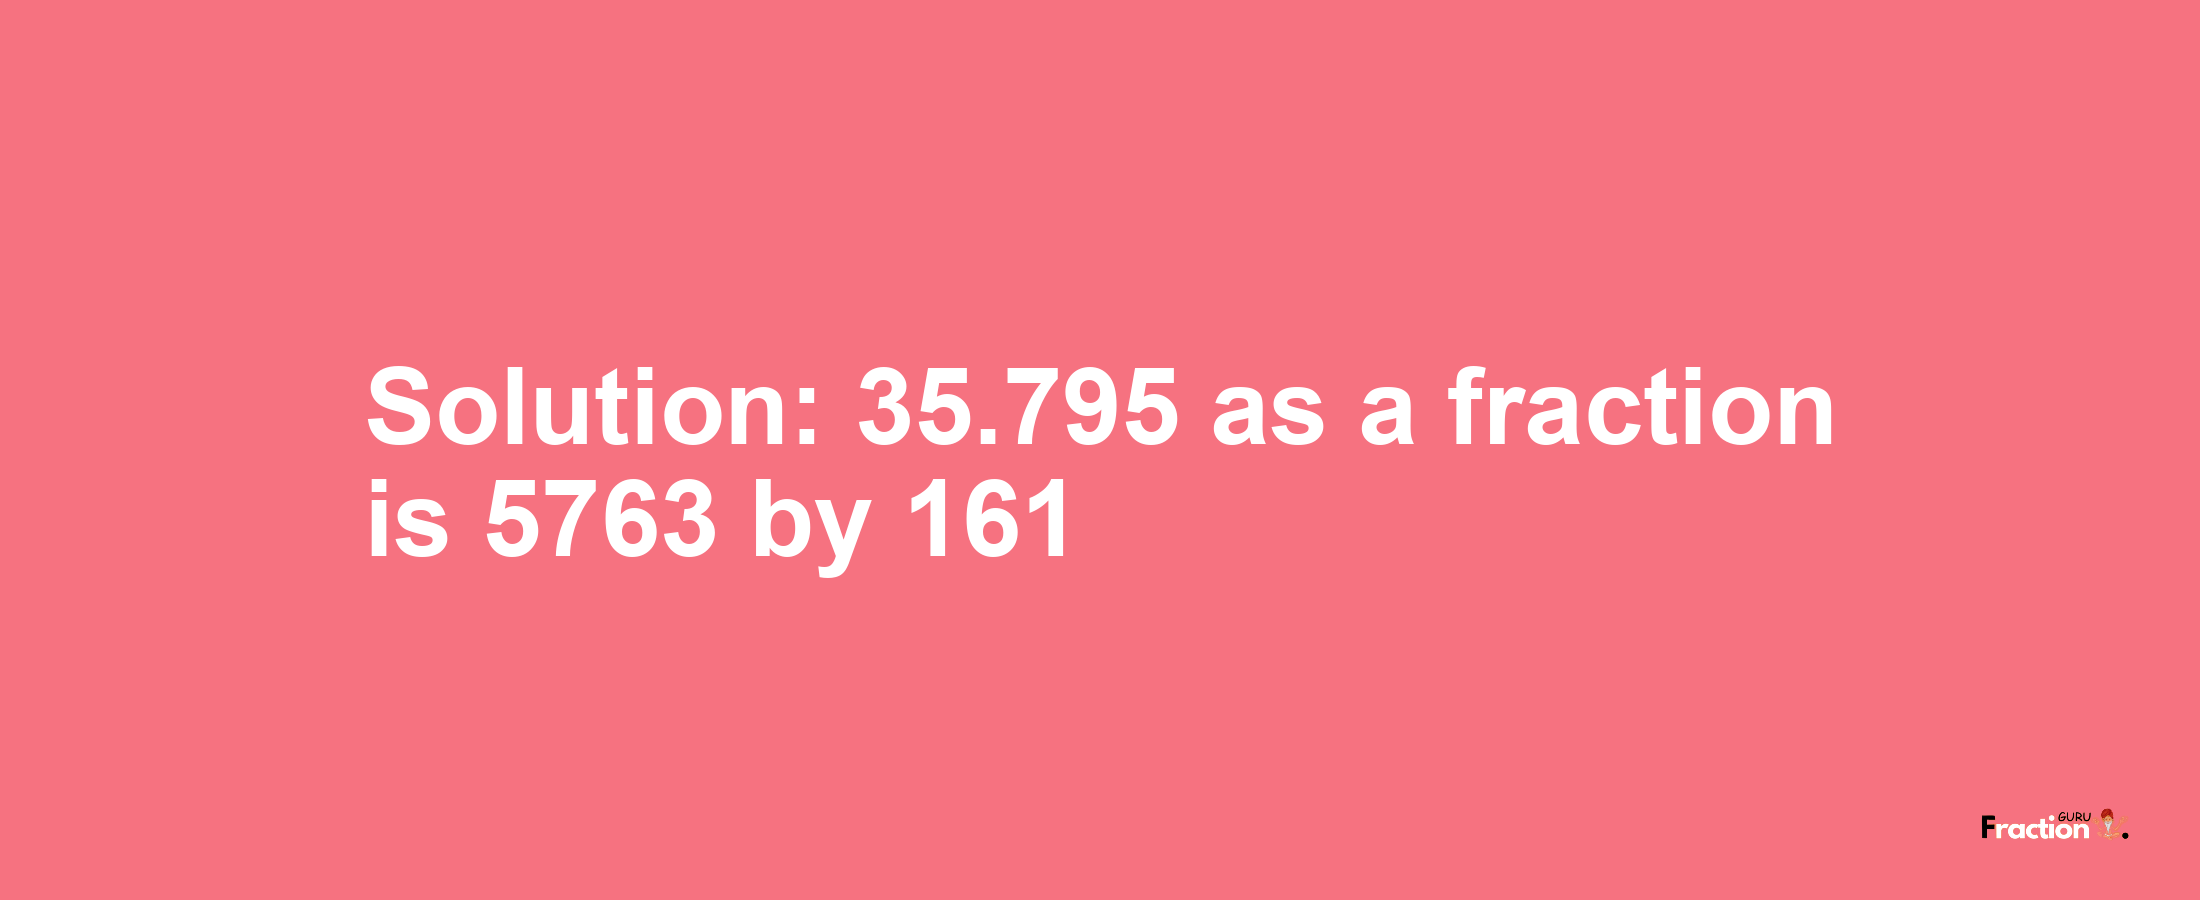 Solution:35.795 as a fraction is 5763/161